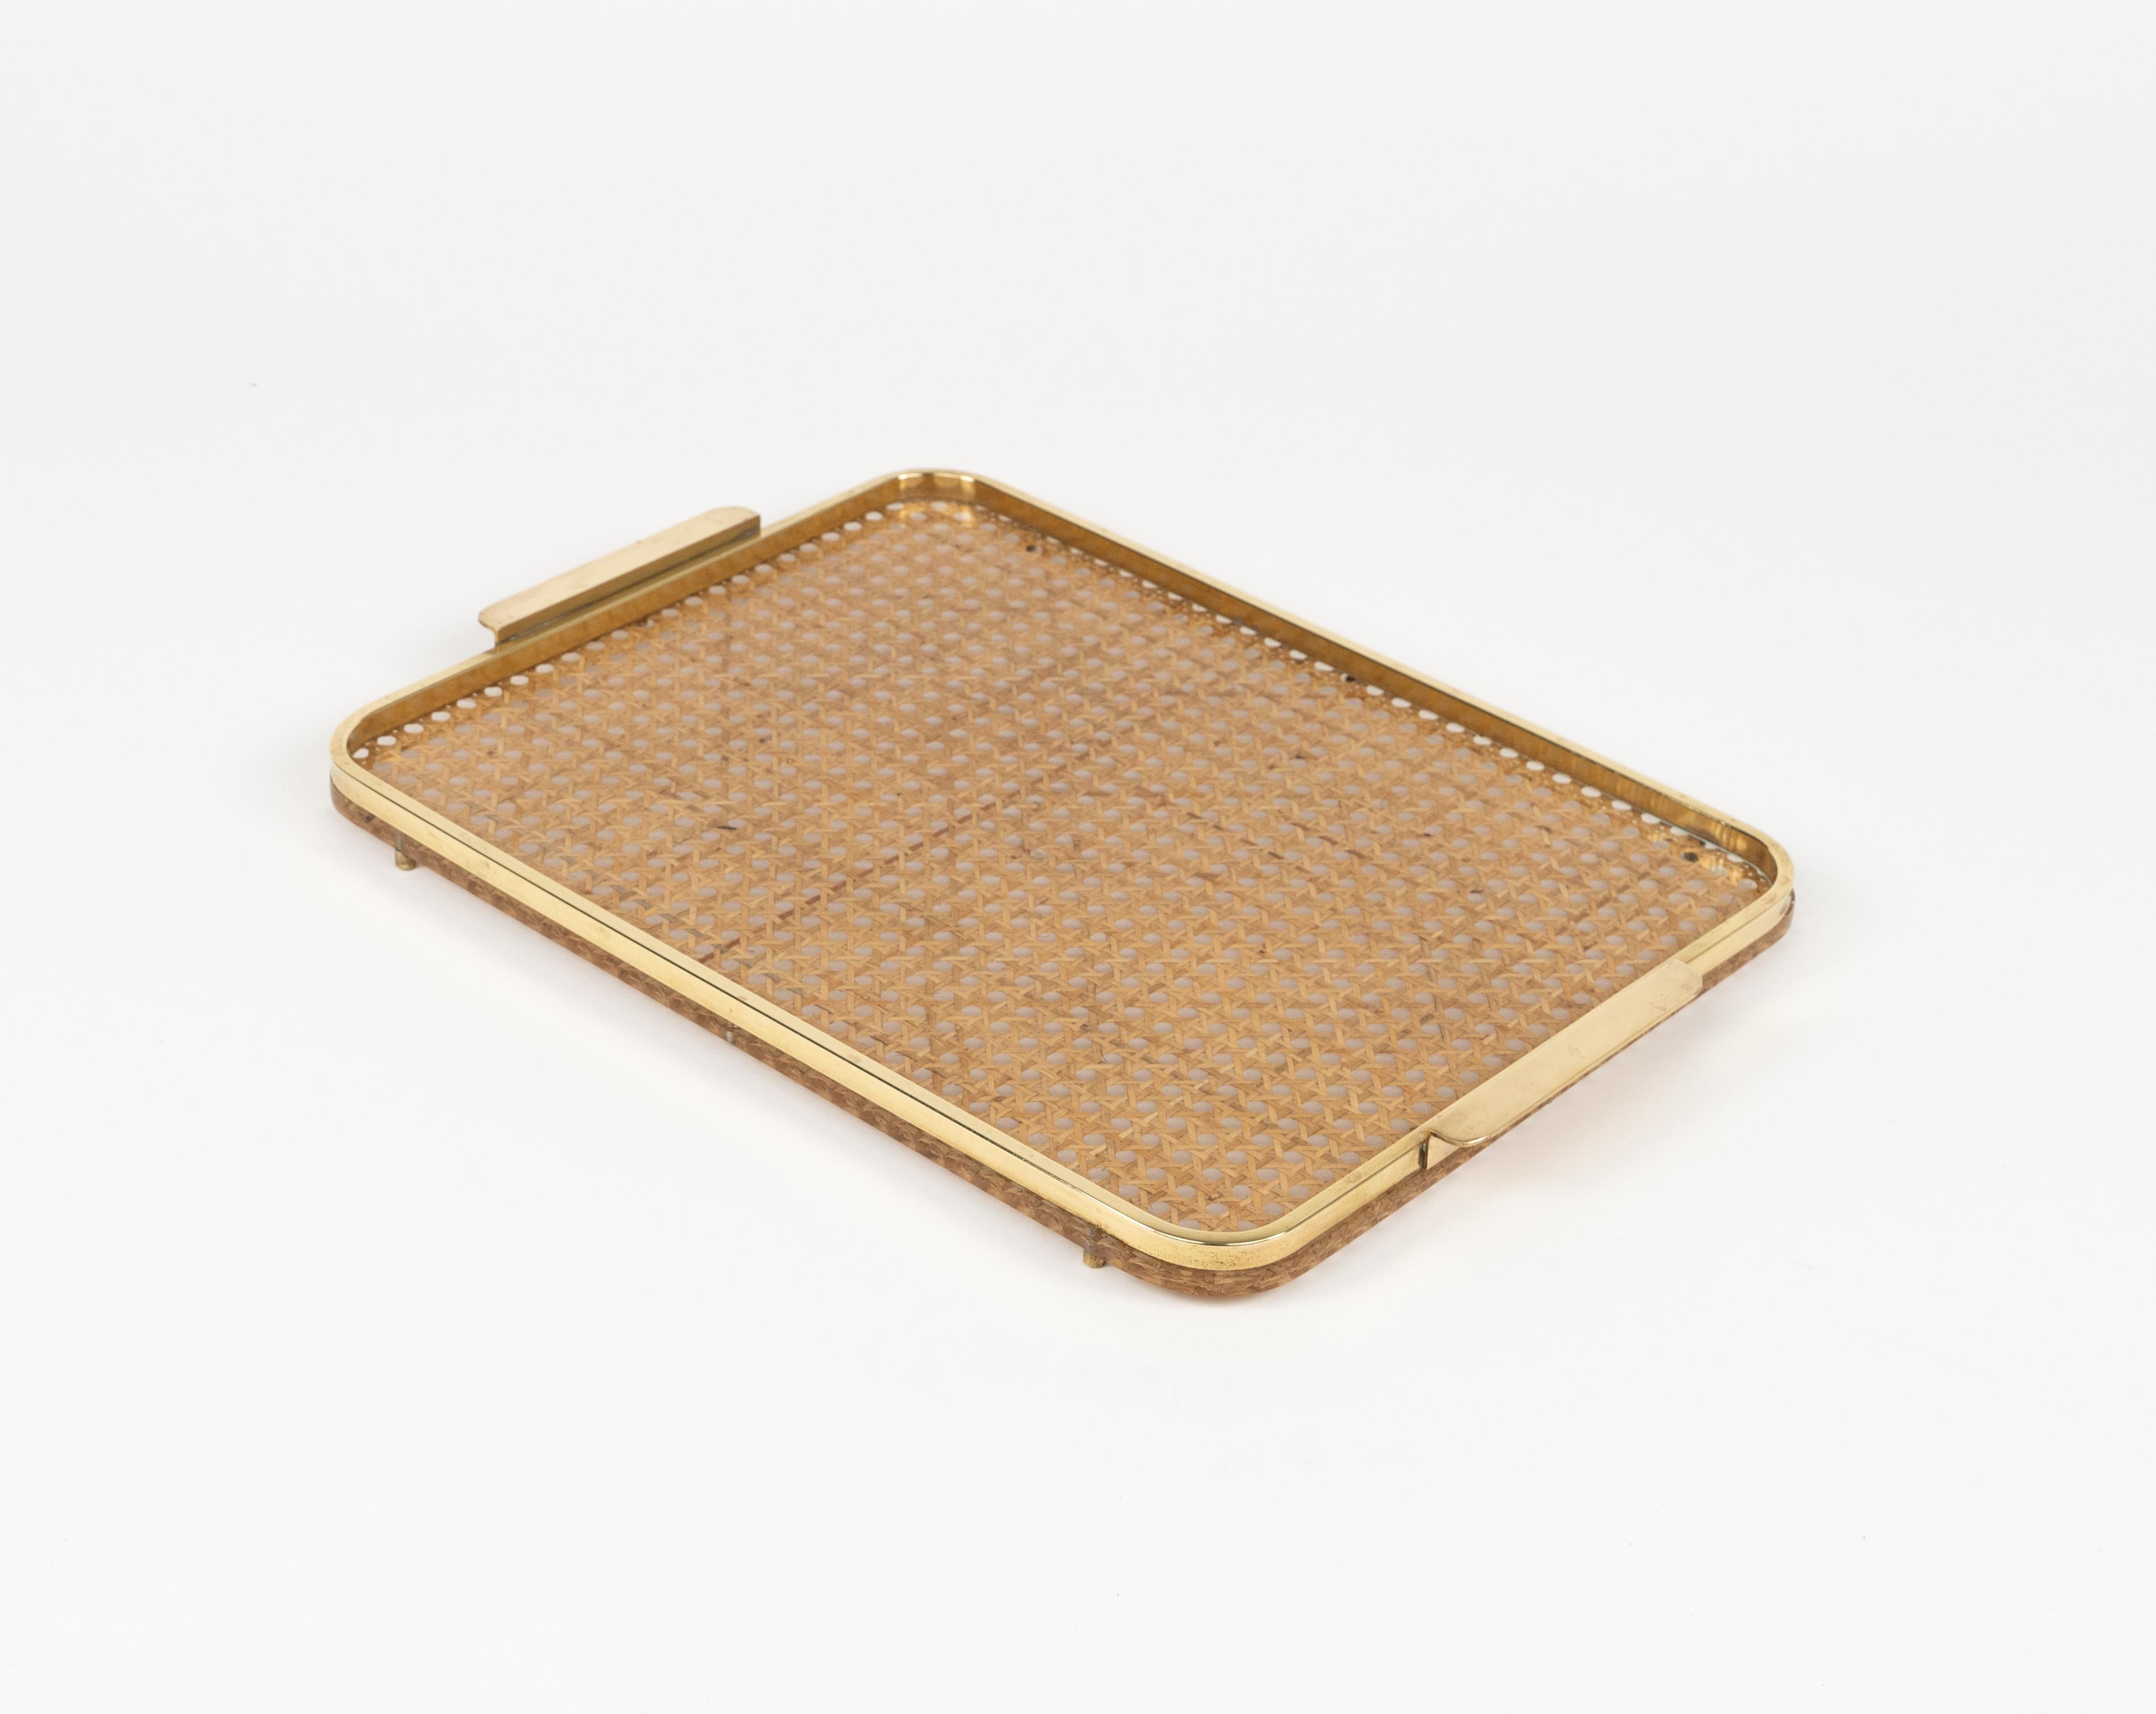 Serving Tray in Lucite, Rattan and Brass Christian Dior Style, Italy, 1970s For Sale 7